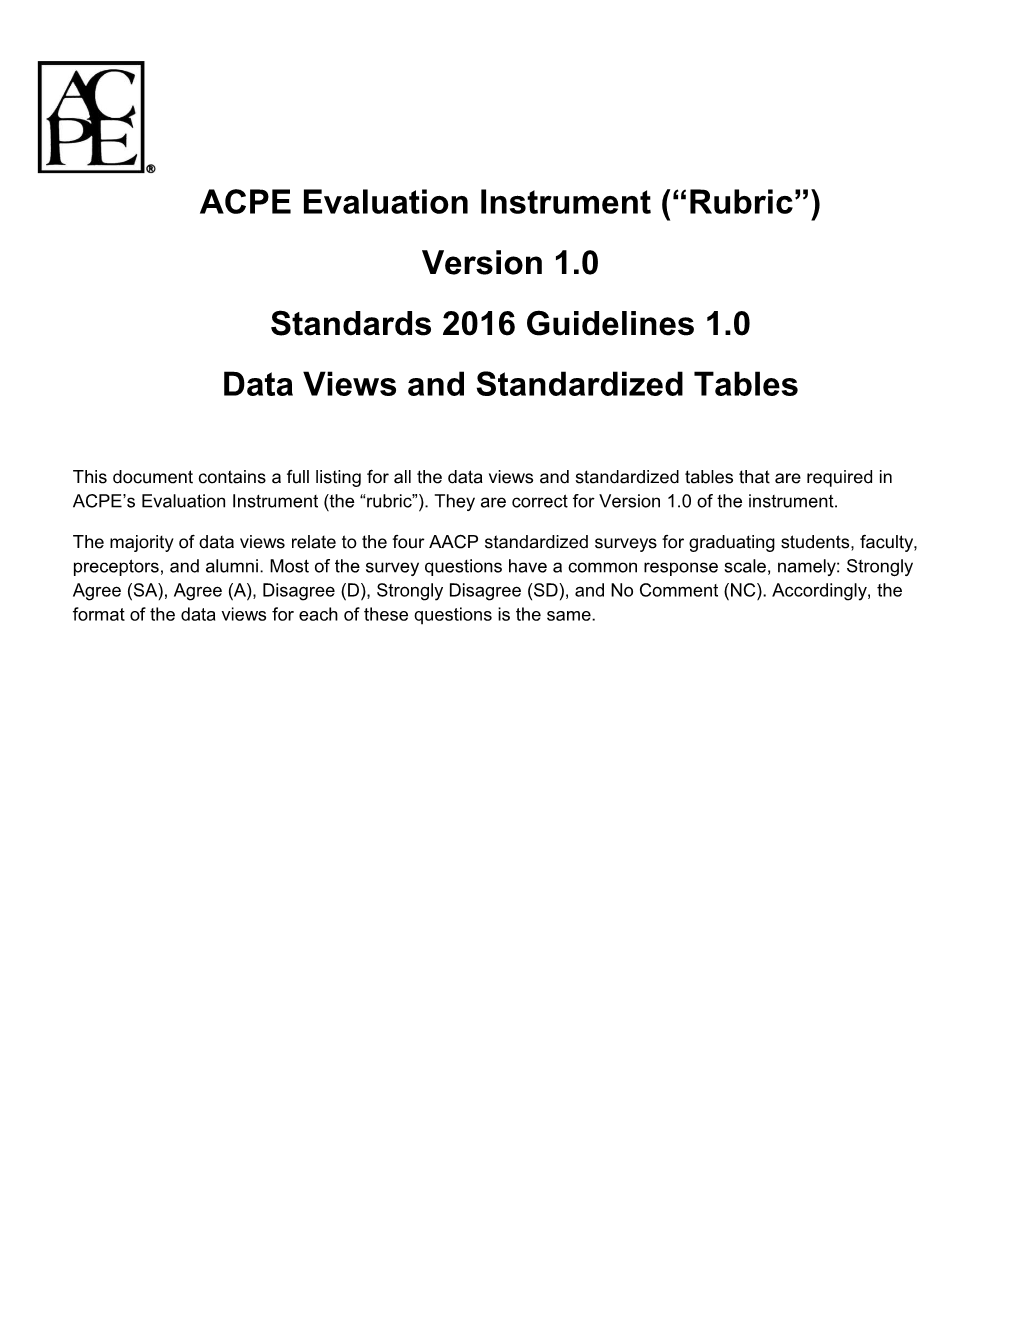 Data Views and Standardized Tables in ACPE Rubric Version 4.0